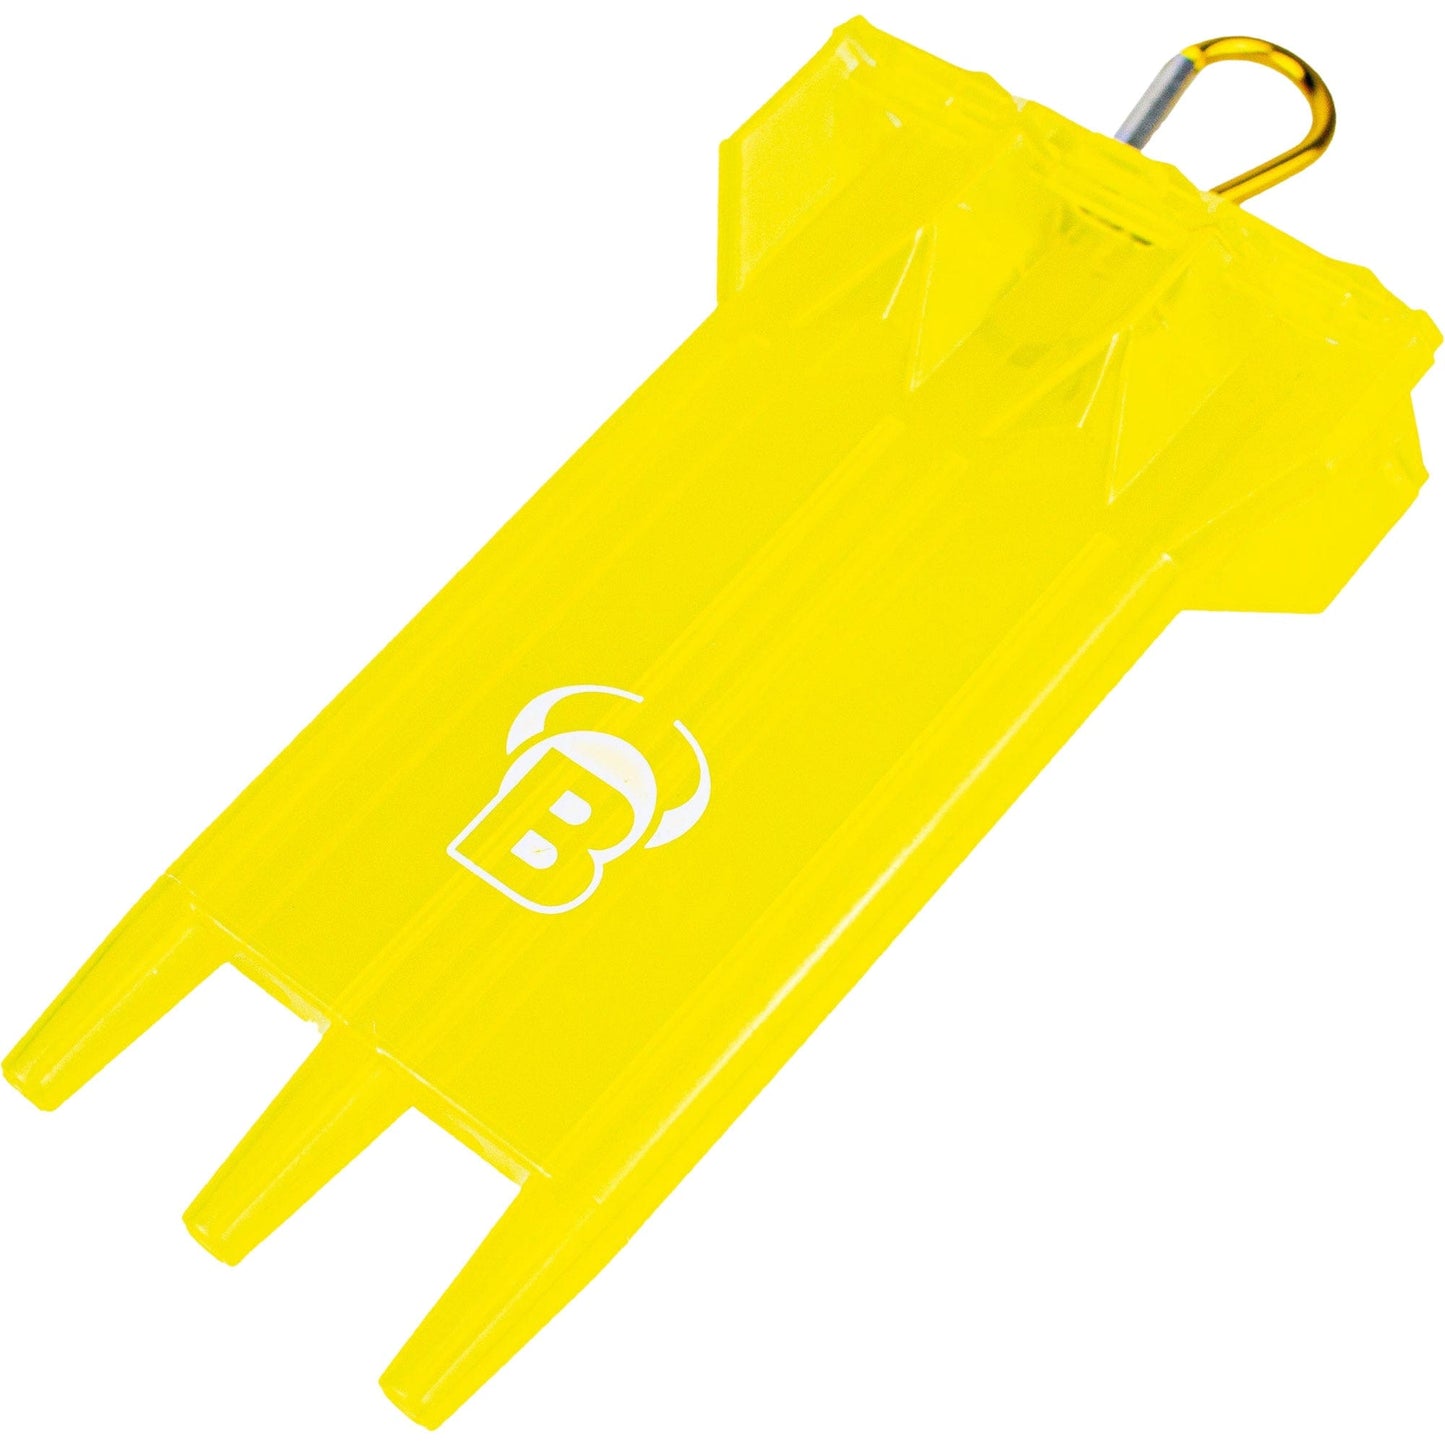 BULL'S Acra X Dart Case - Holds Fully Set Up Darts - Colours Yellow